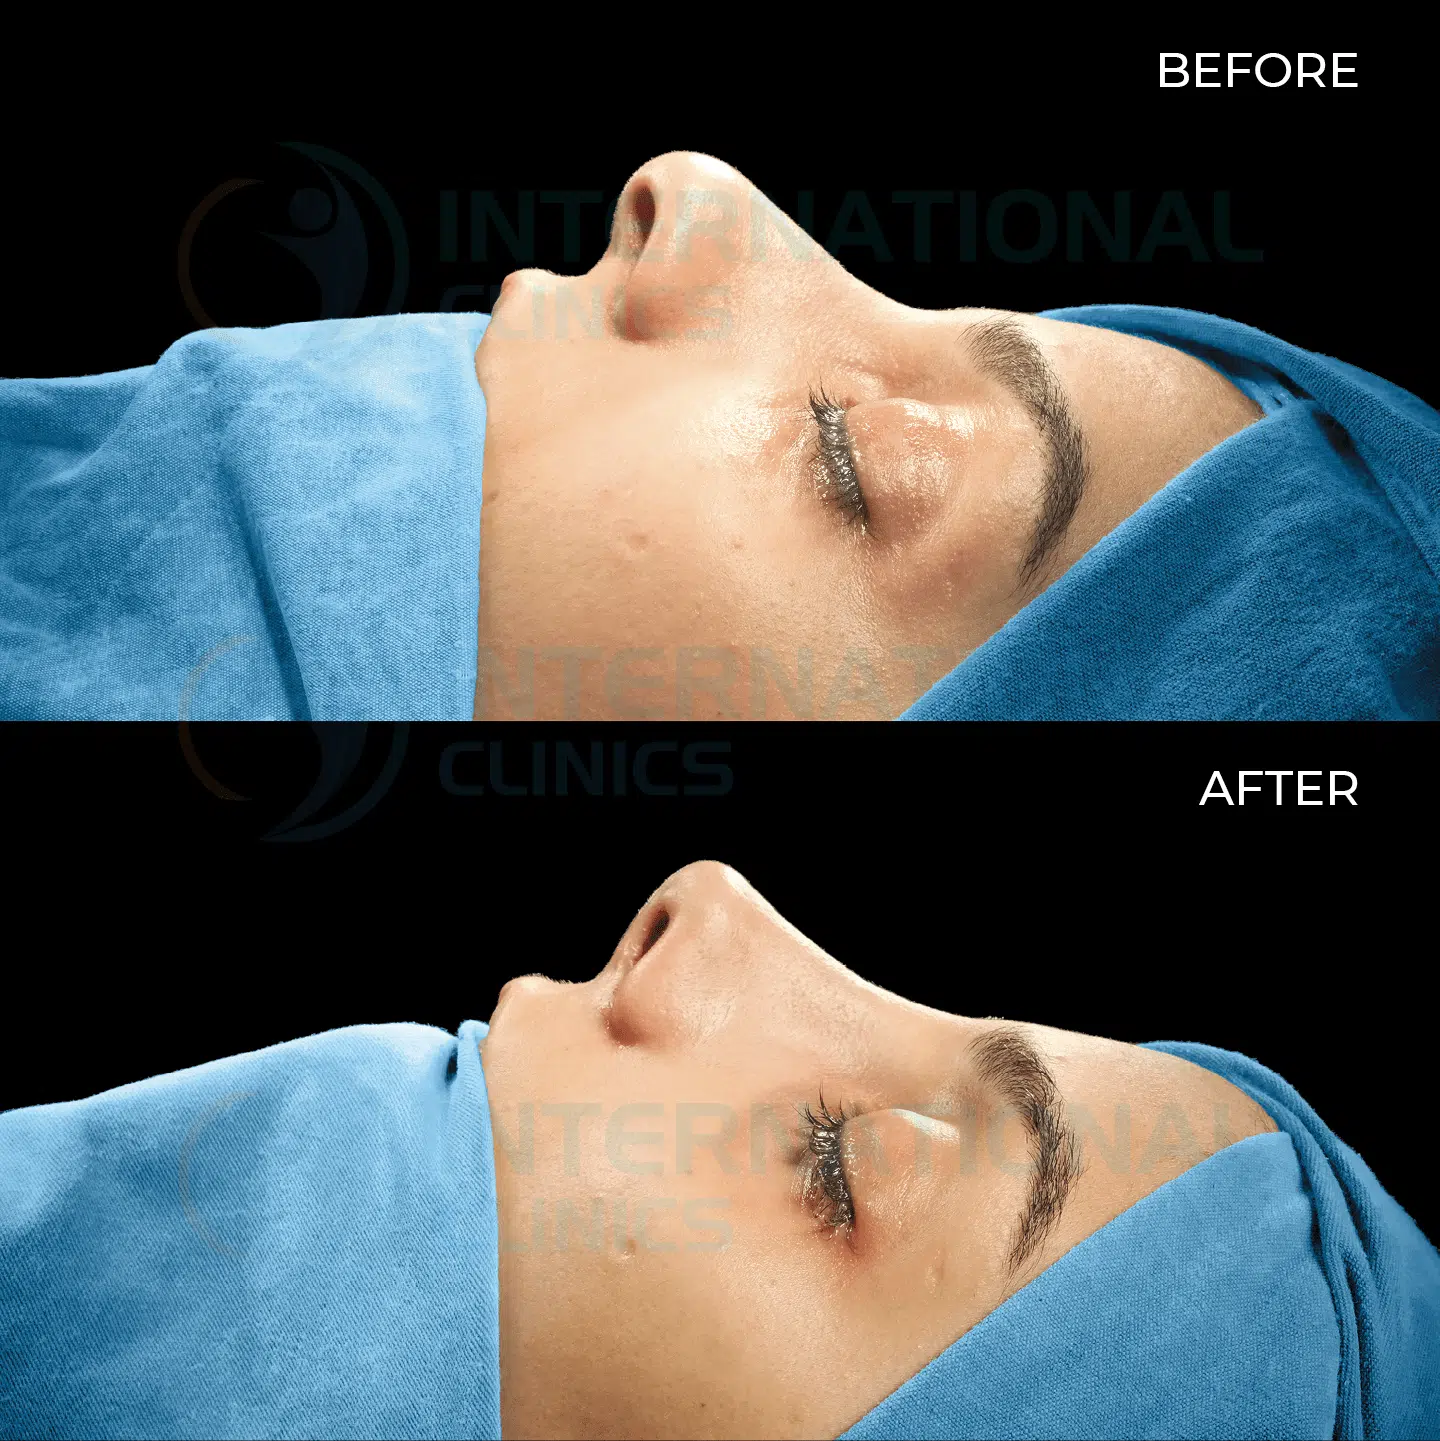 Asian Nose Job Before and After image